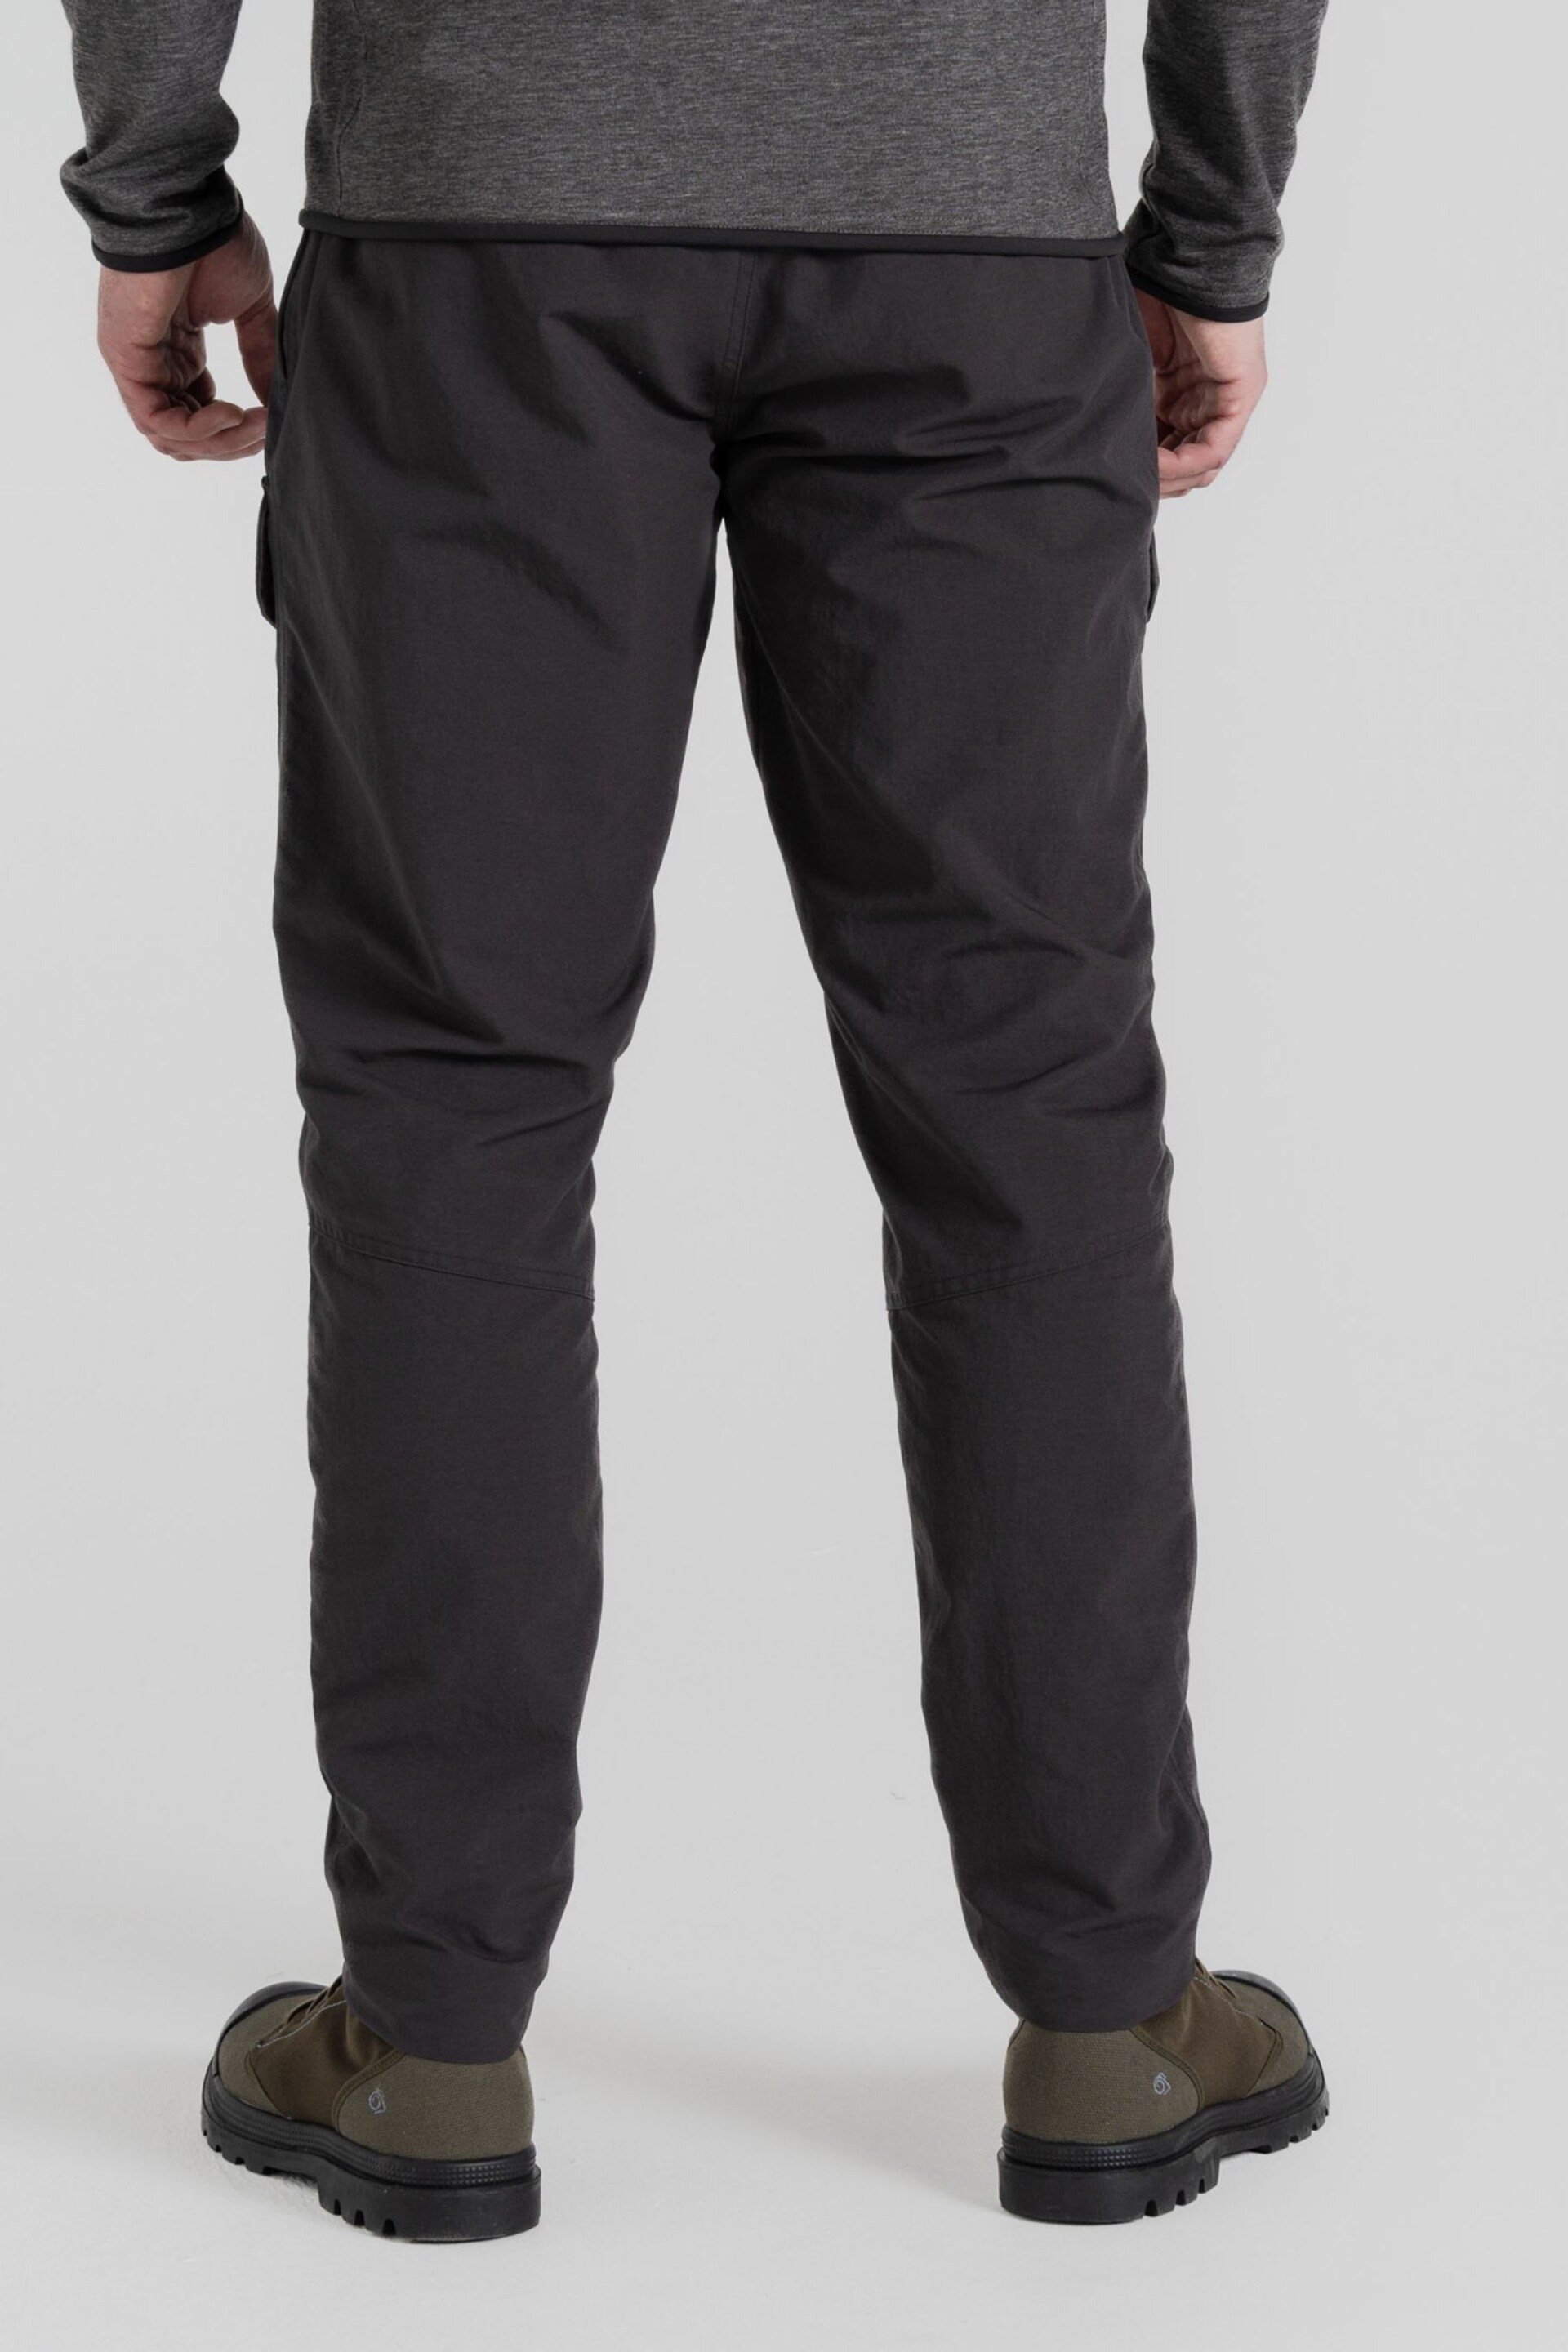 Craghoppers Black NL Adventure Trousers III - Image 2 of 7